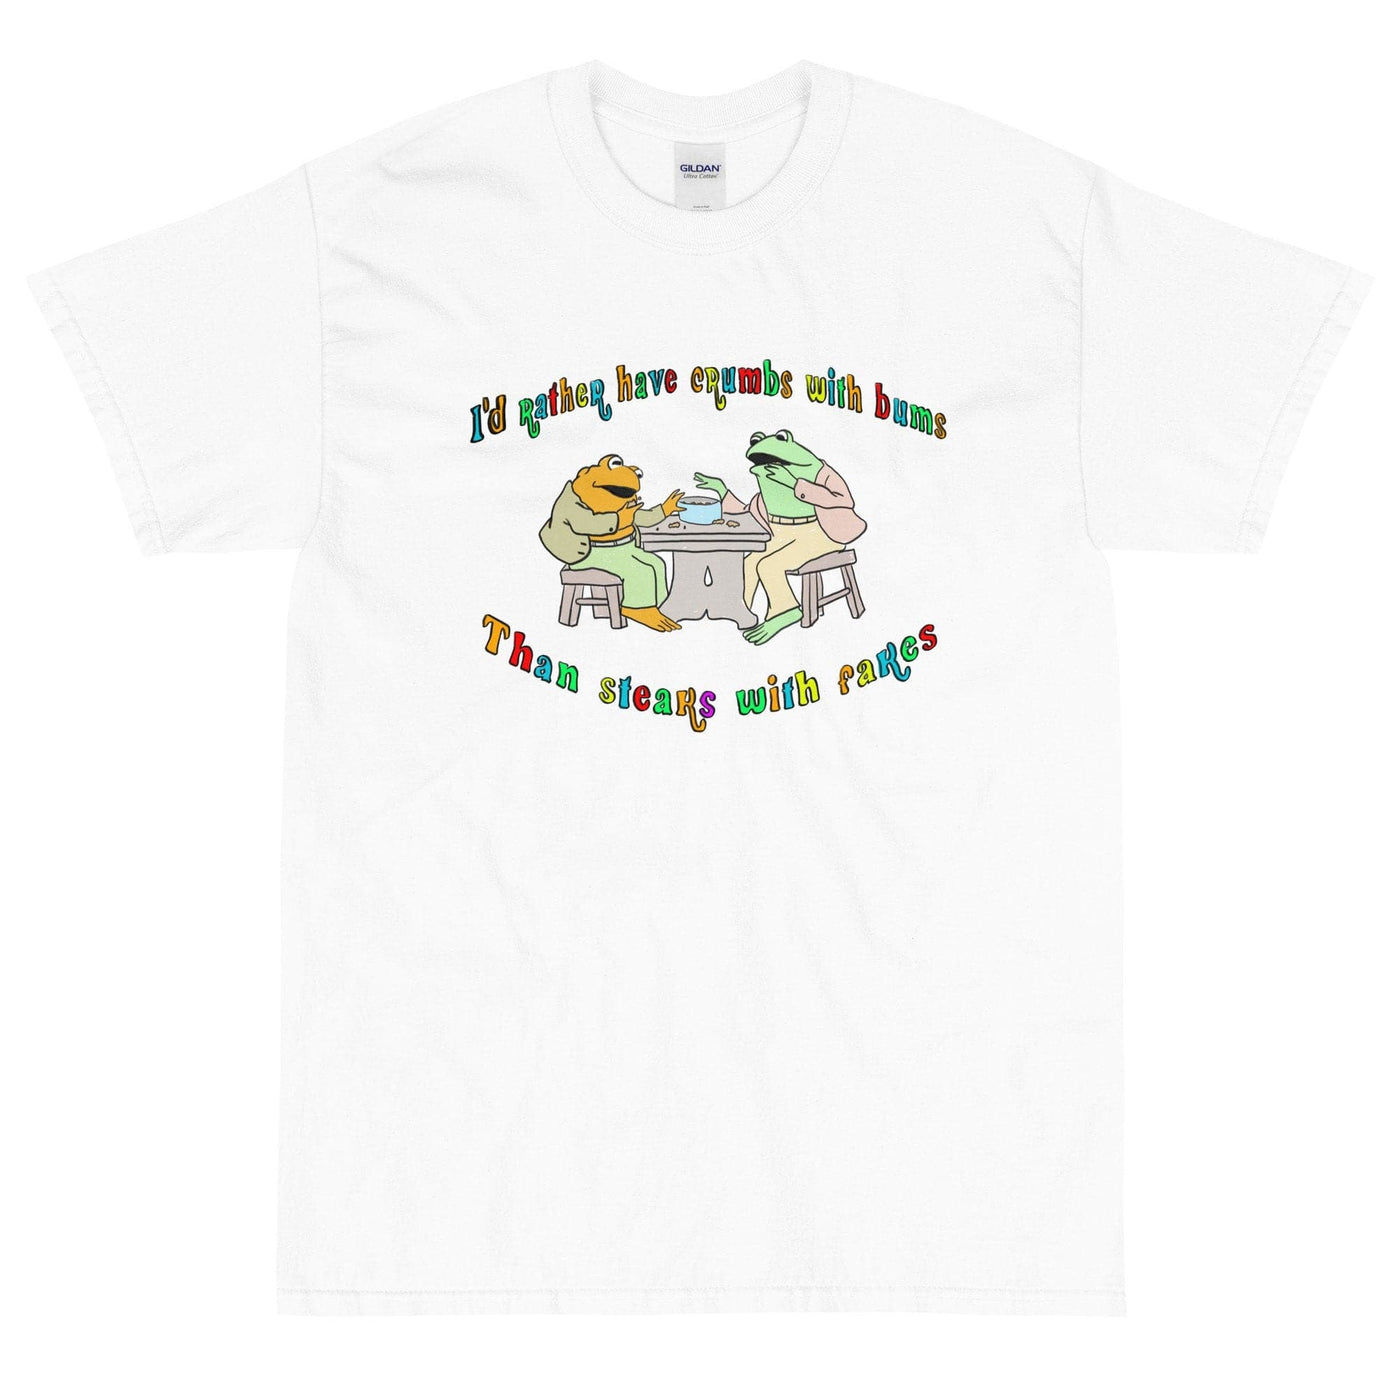 Crumbs with Bums Short Sleeve T-Shirt